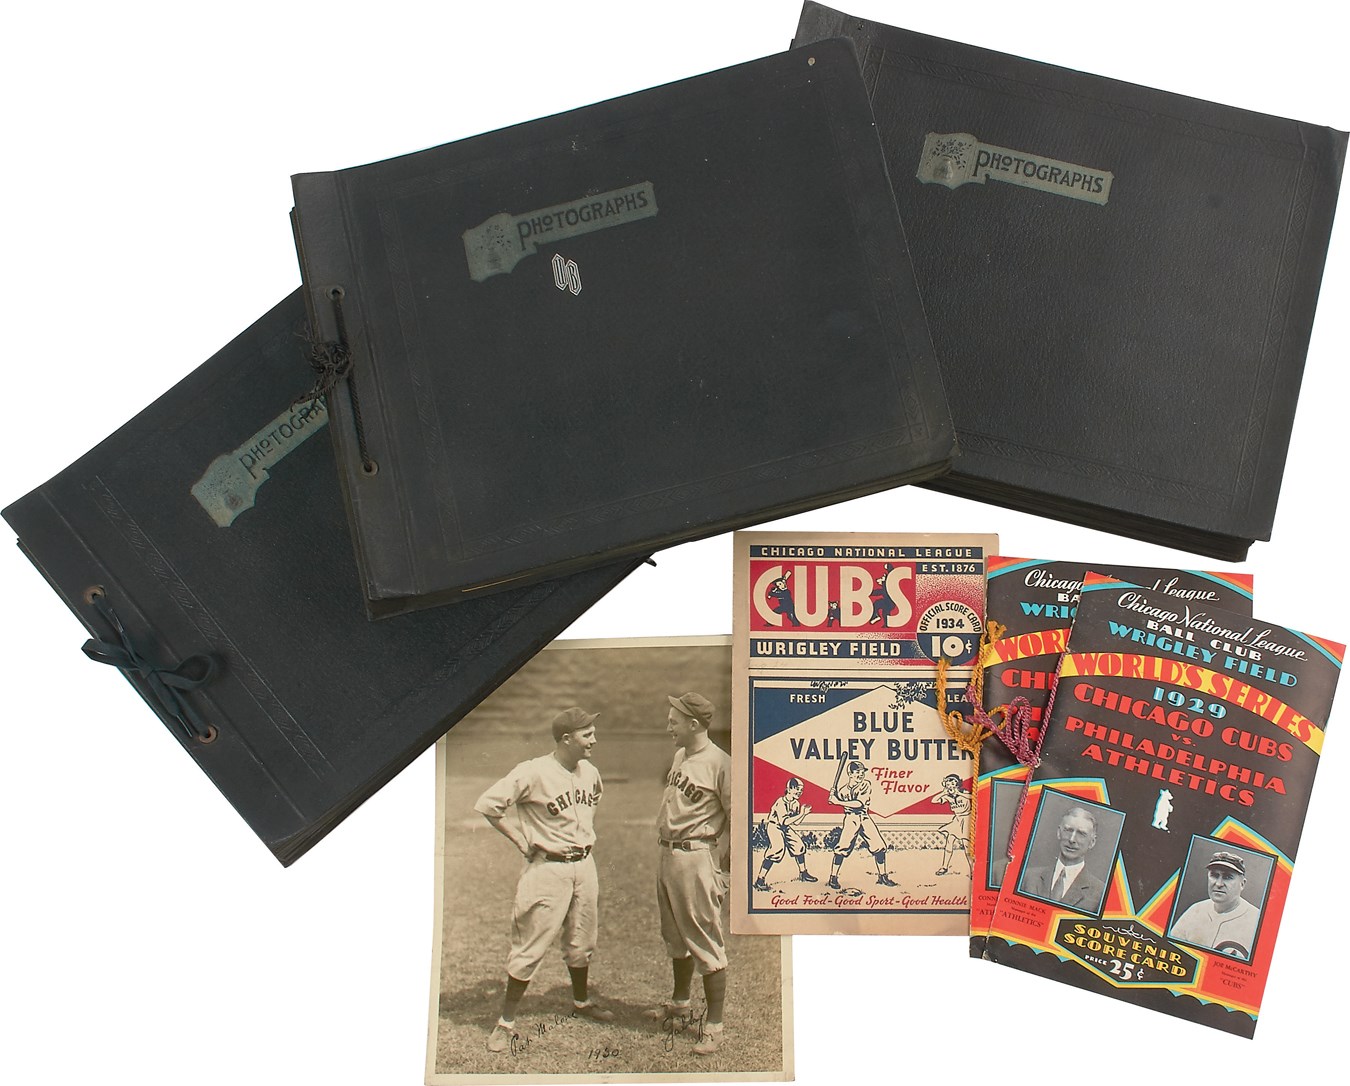 1920s-30s Chicago Cubs Scrapbooks with World Series Tickets, Programs and Autographs